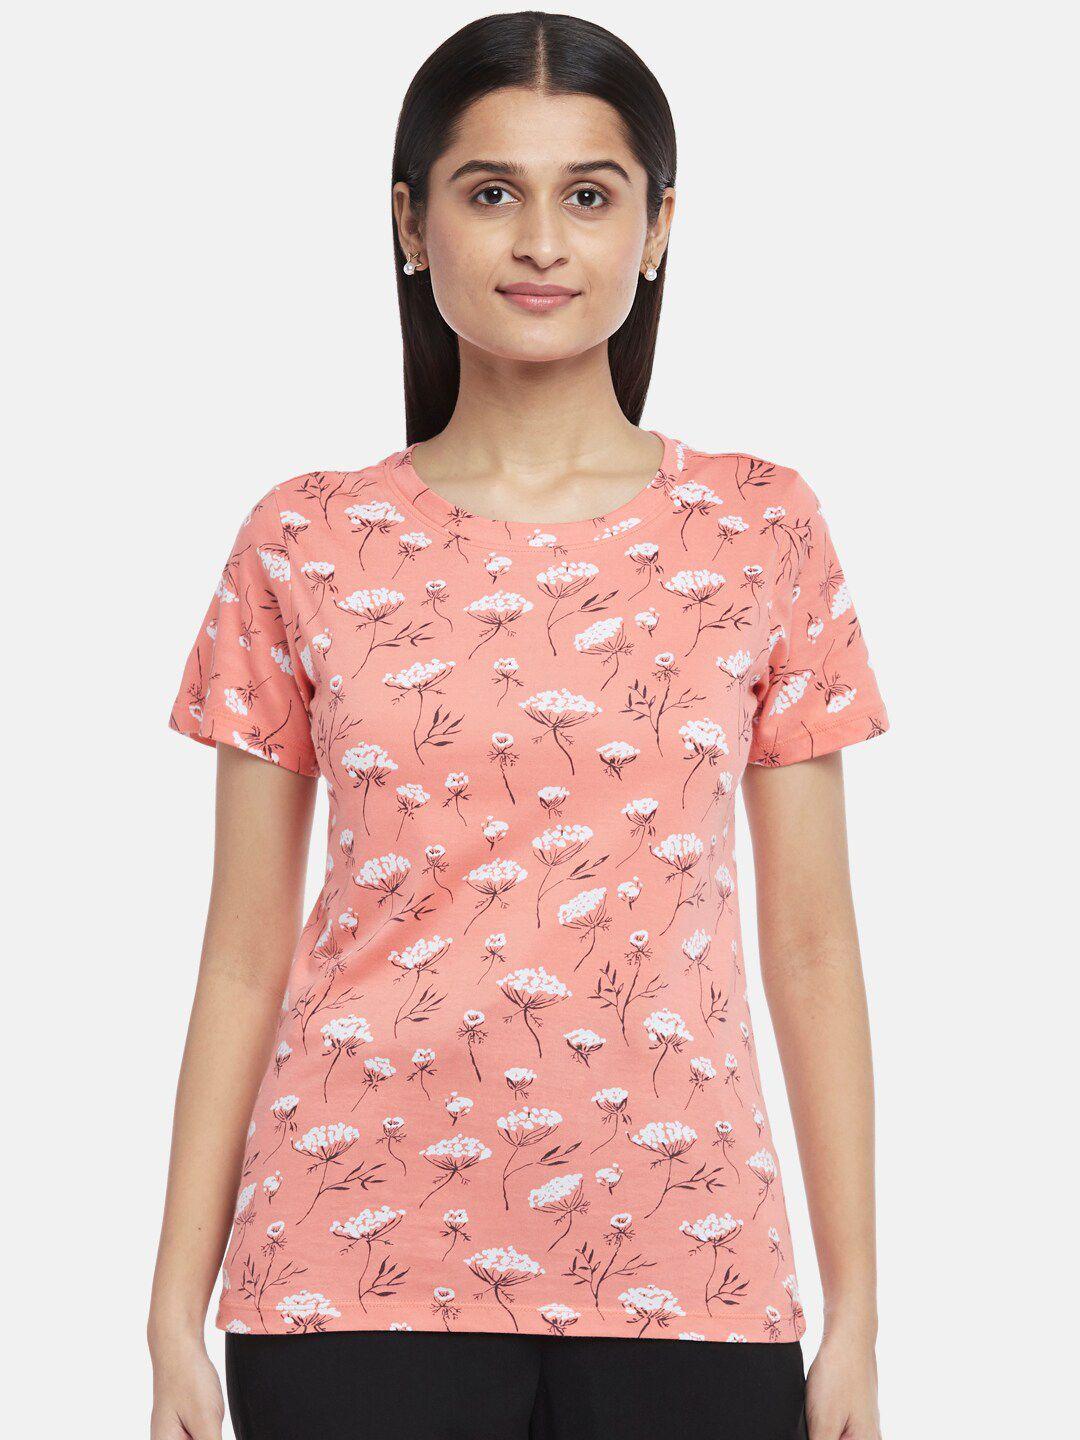 honey by pantaloons women coral & white floral printed pure cotton t-shirt